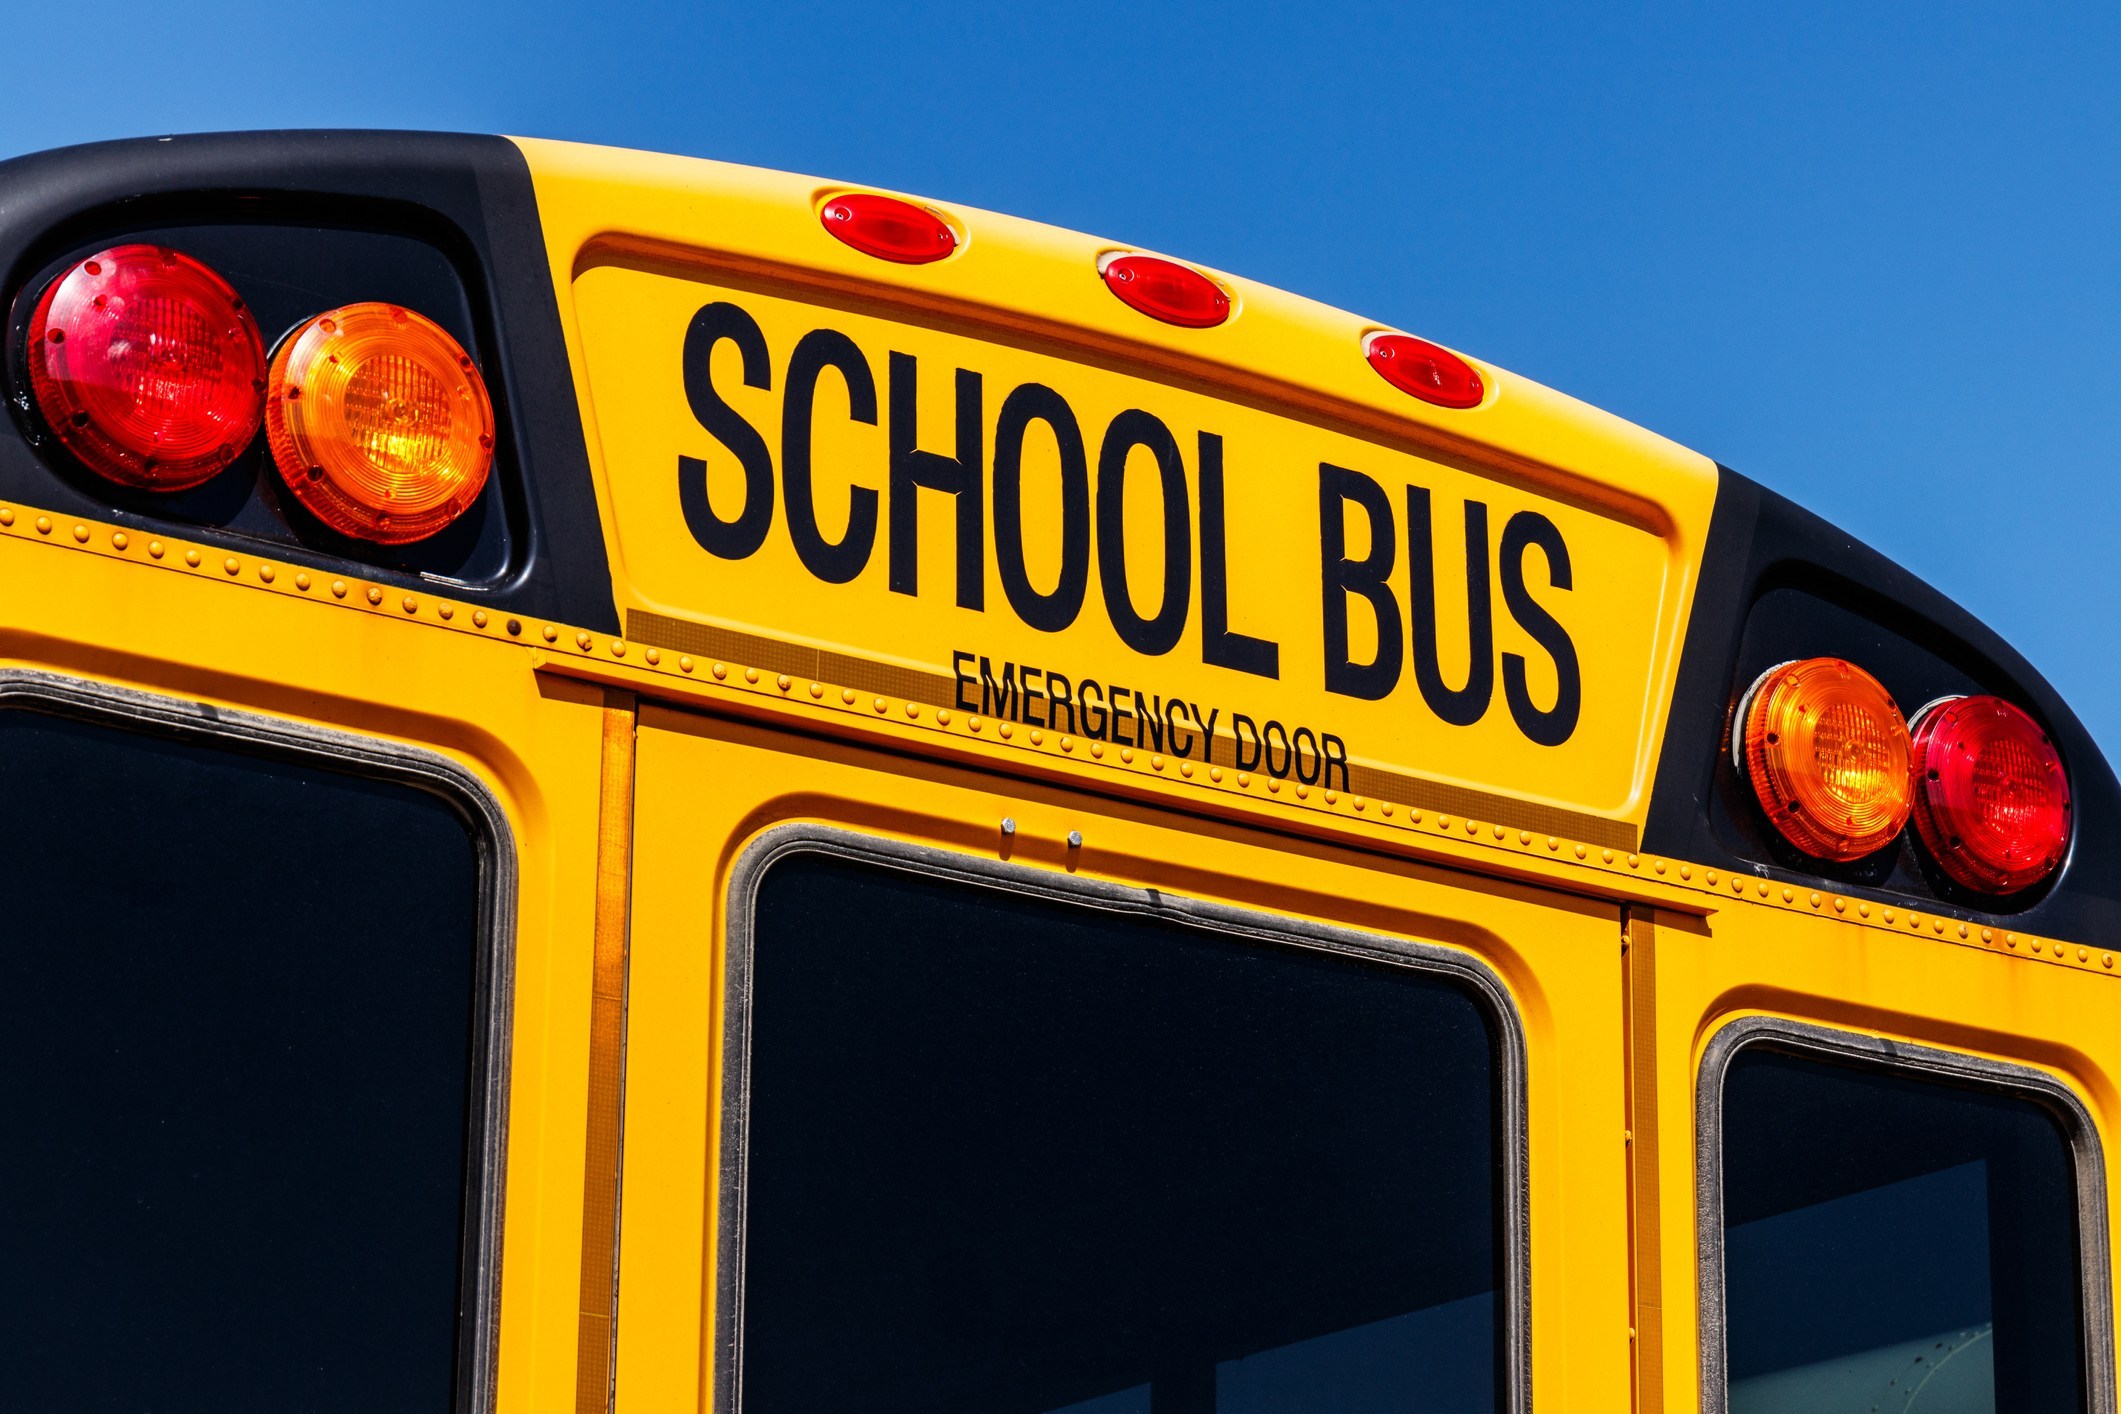 School bus (Getty Images)